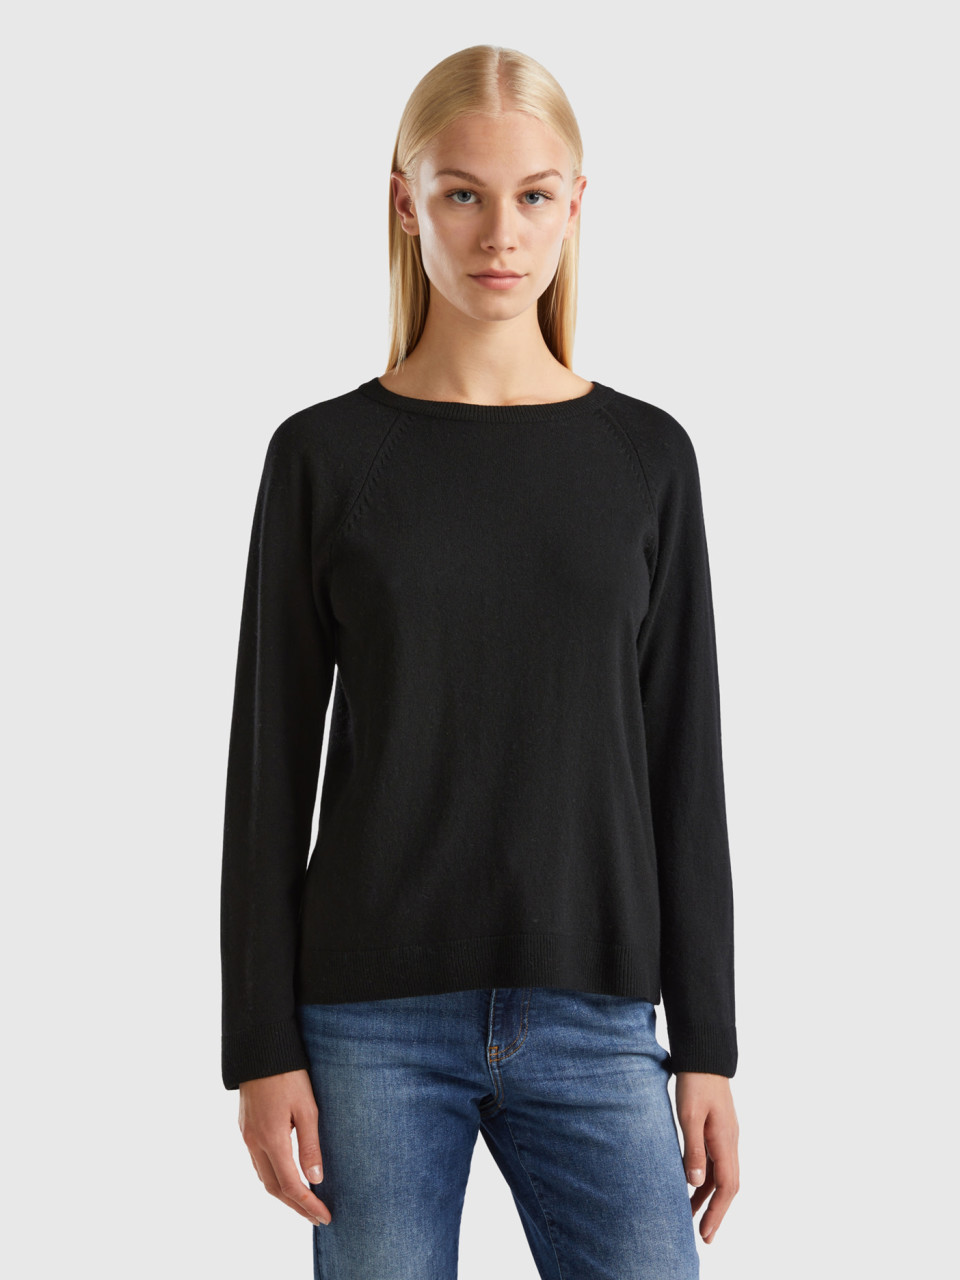 Benetton, Black Crew Neck Sweater In Cashmere And Wool Blend, Black, Women